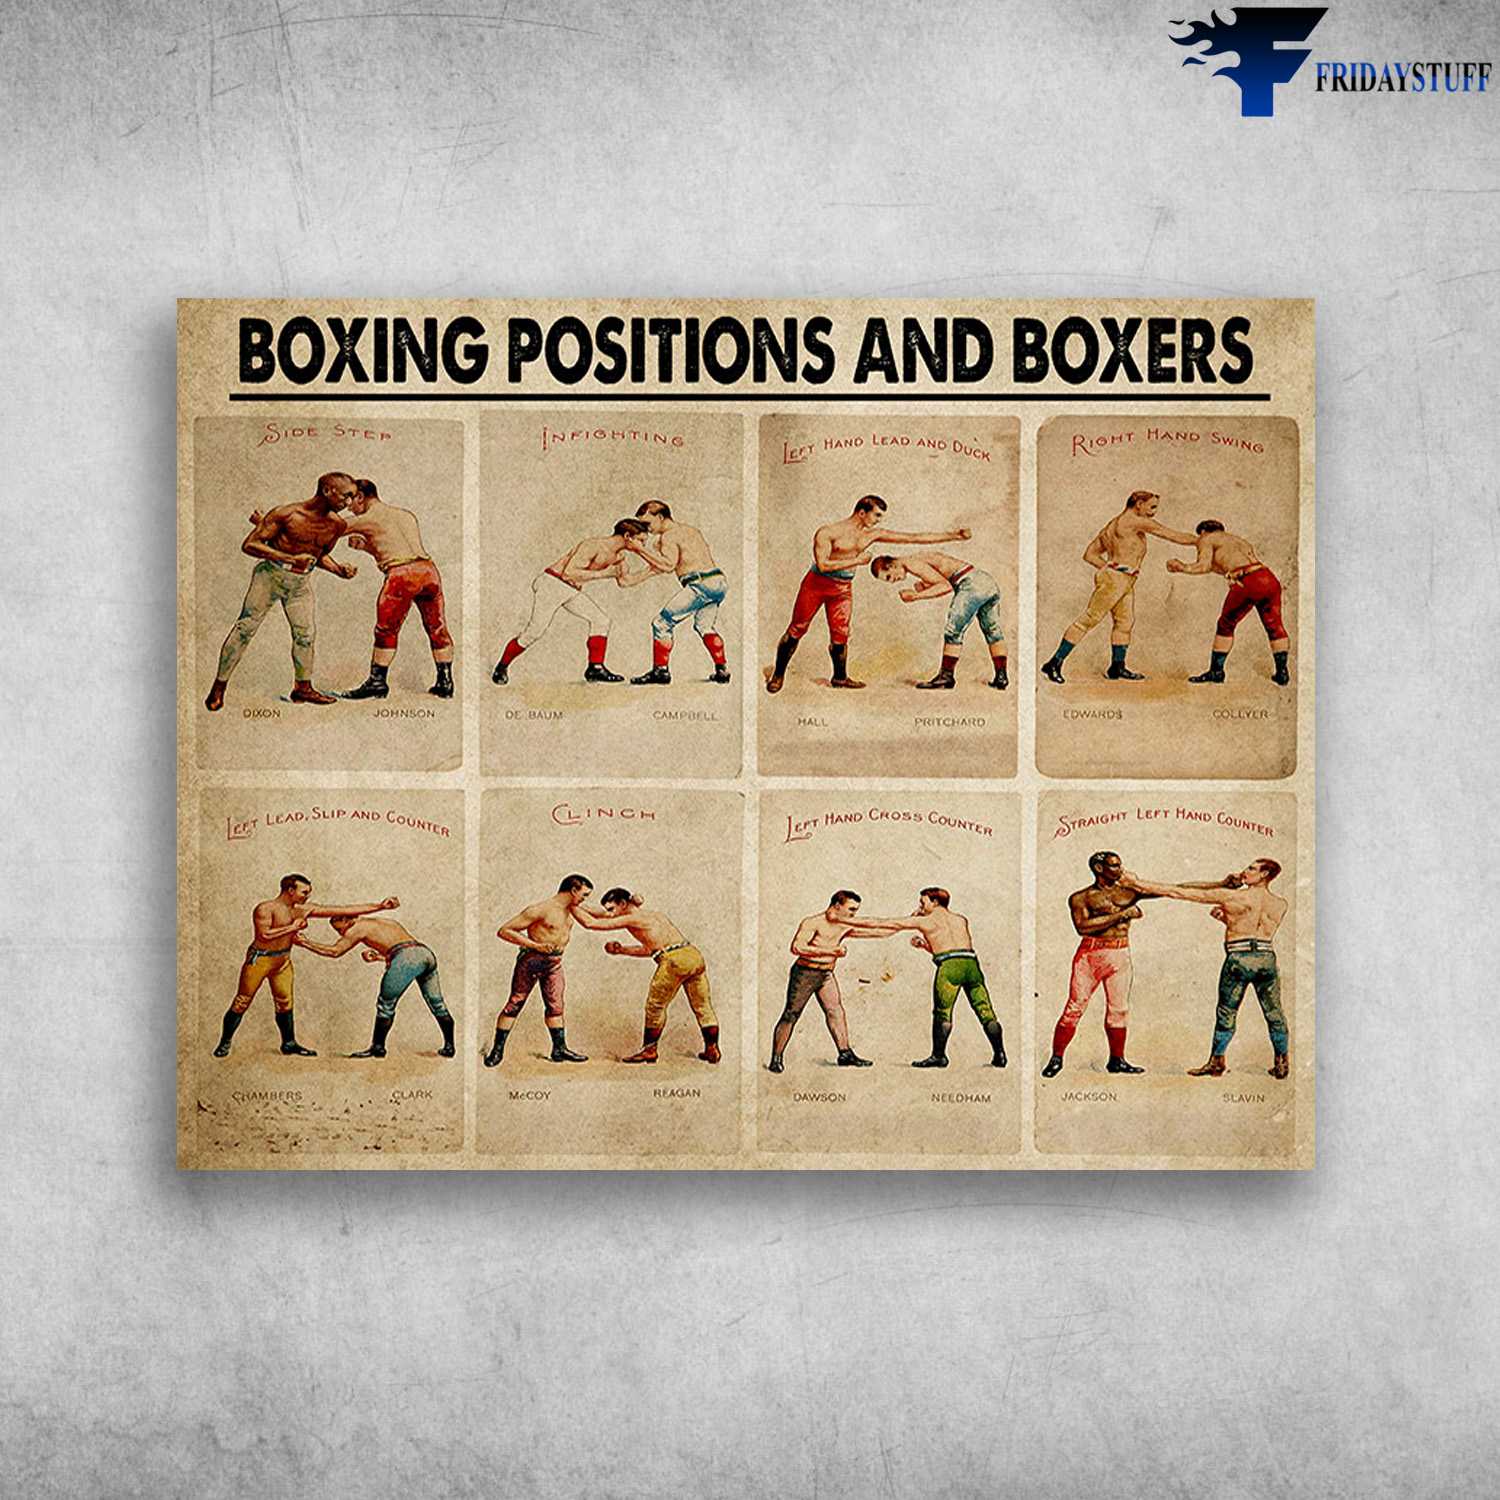 Boxing Poster, Boxing Room - Boxing Postions, And Boxers, Boxing Practice